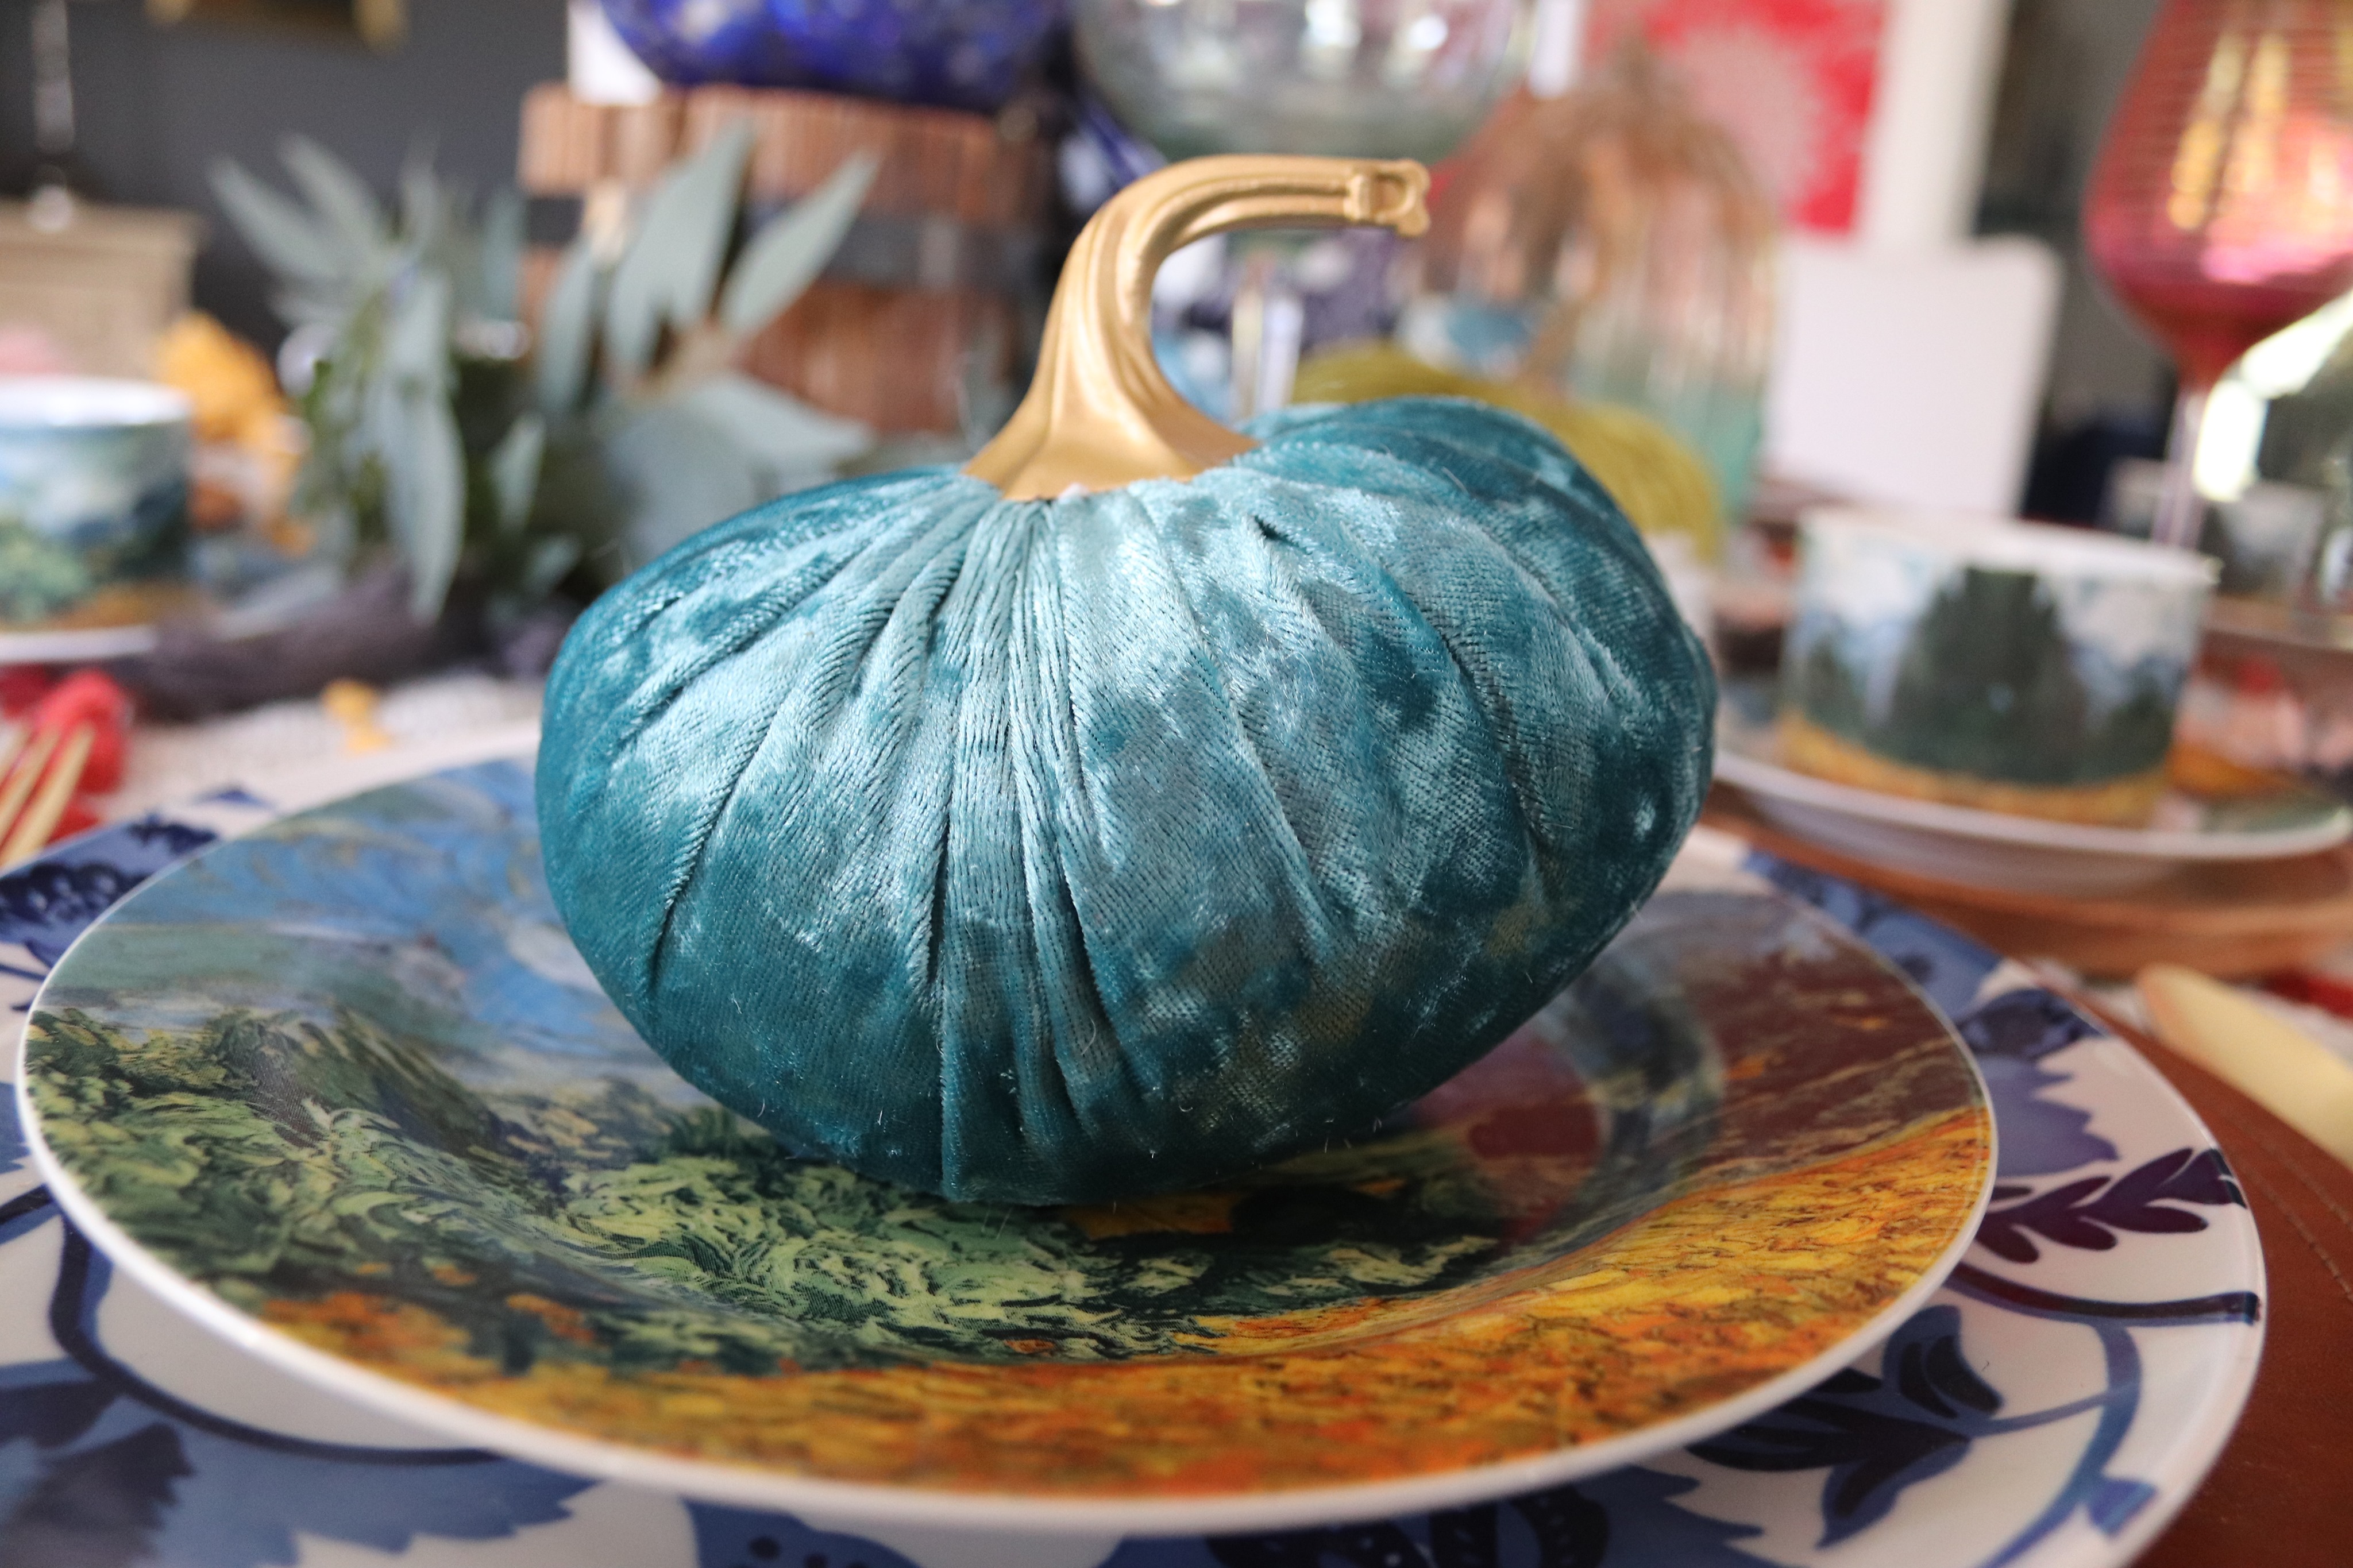 A teal colored velvet pumpkin sits on a place setting on this colorful Thanksgiving table.